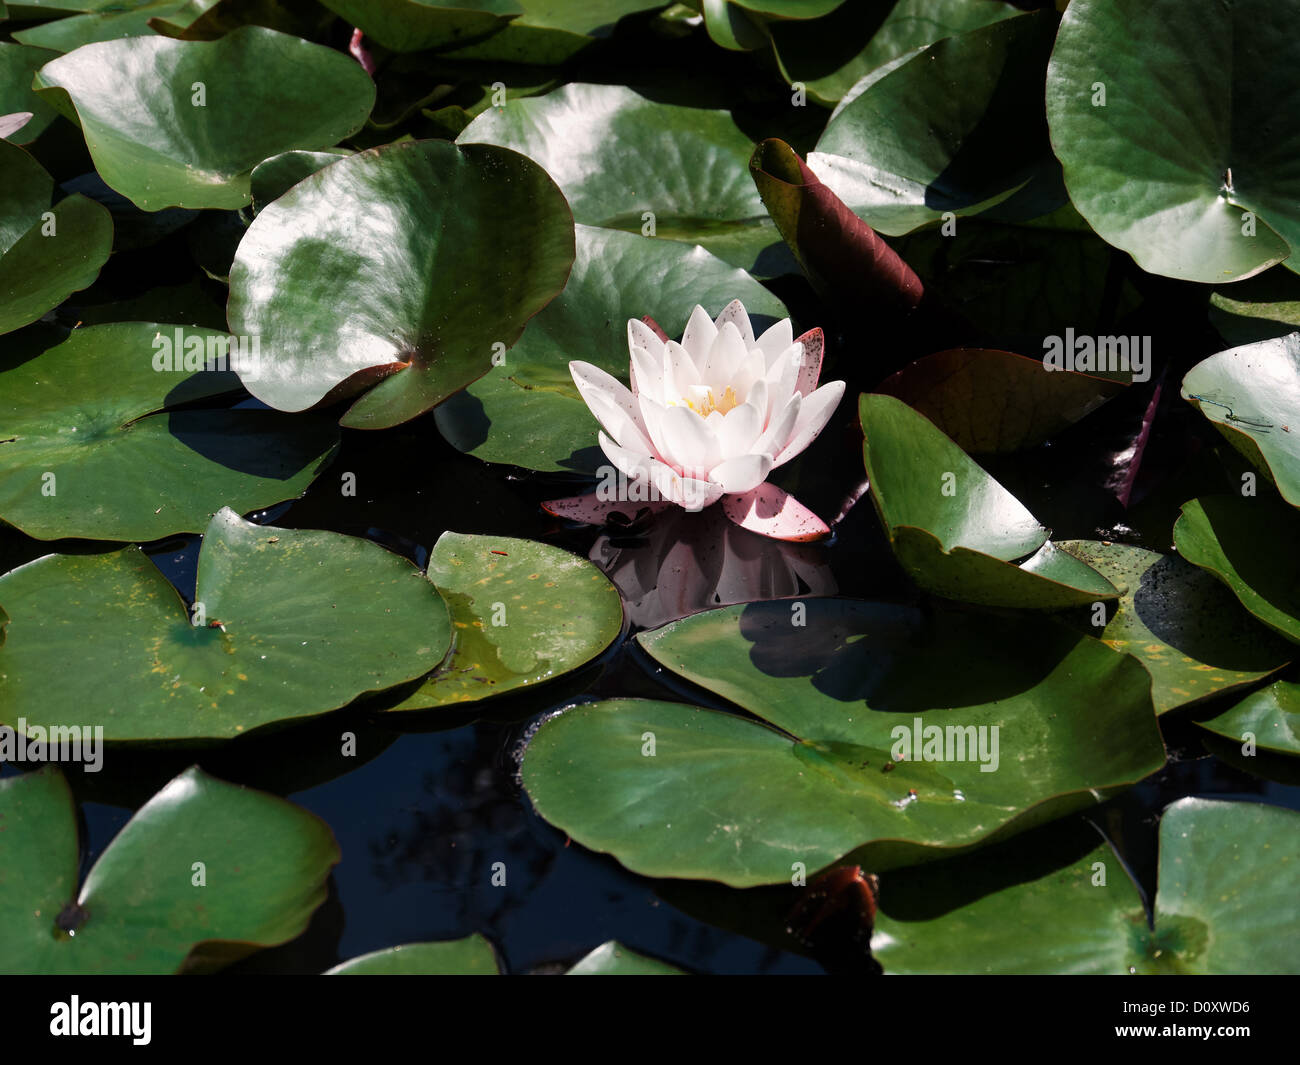 Biotope, flower, blossom, Burgdorf, garden pond, canton, Bern, Nympaea alba, Switzerland, Europe, swimming, leaves, water lily, Stock Photo